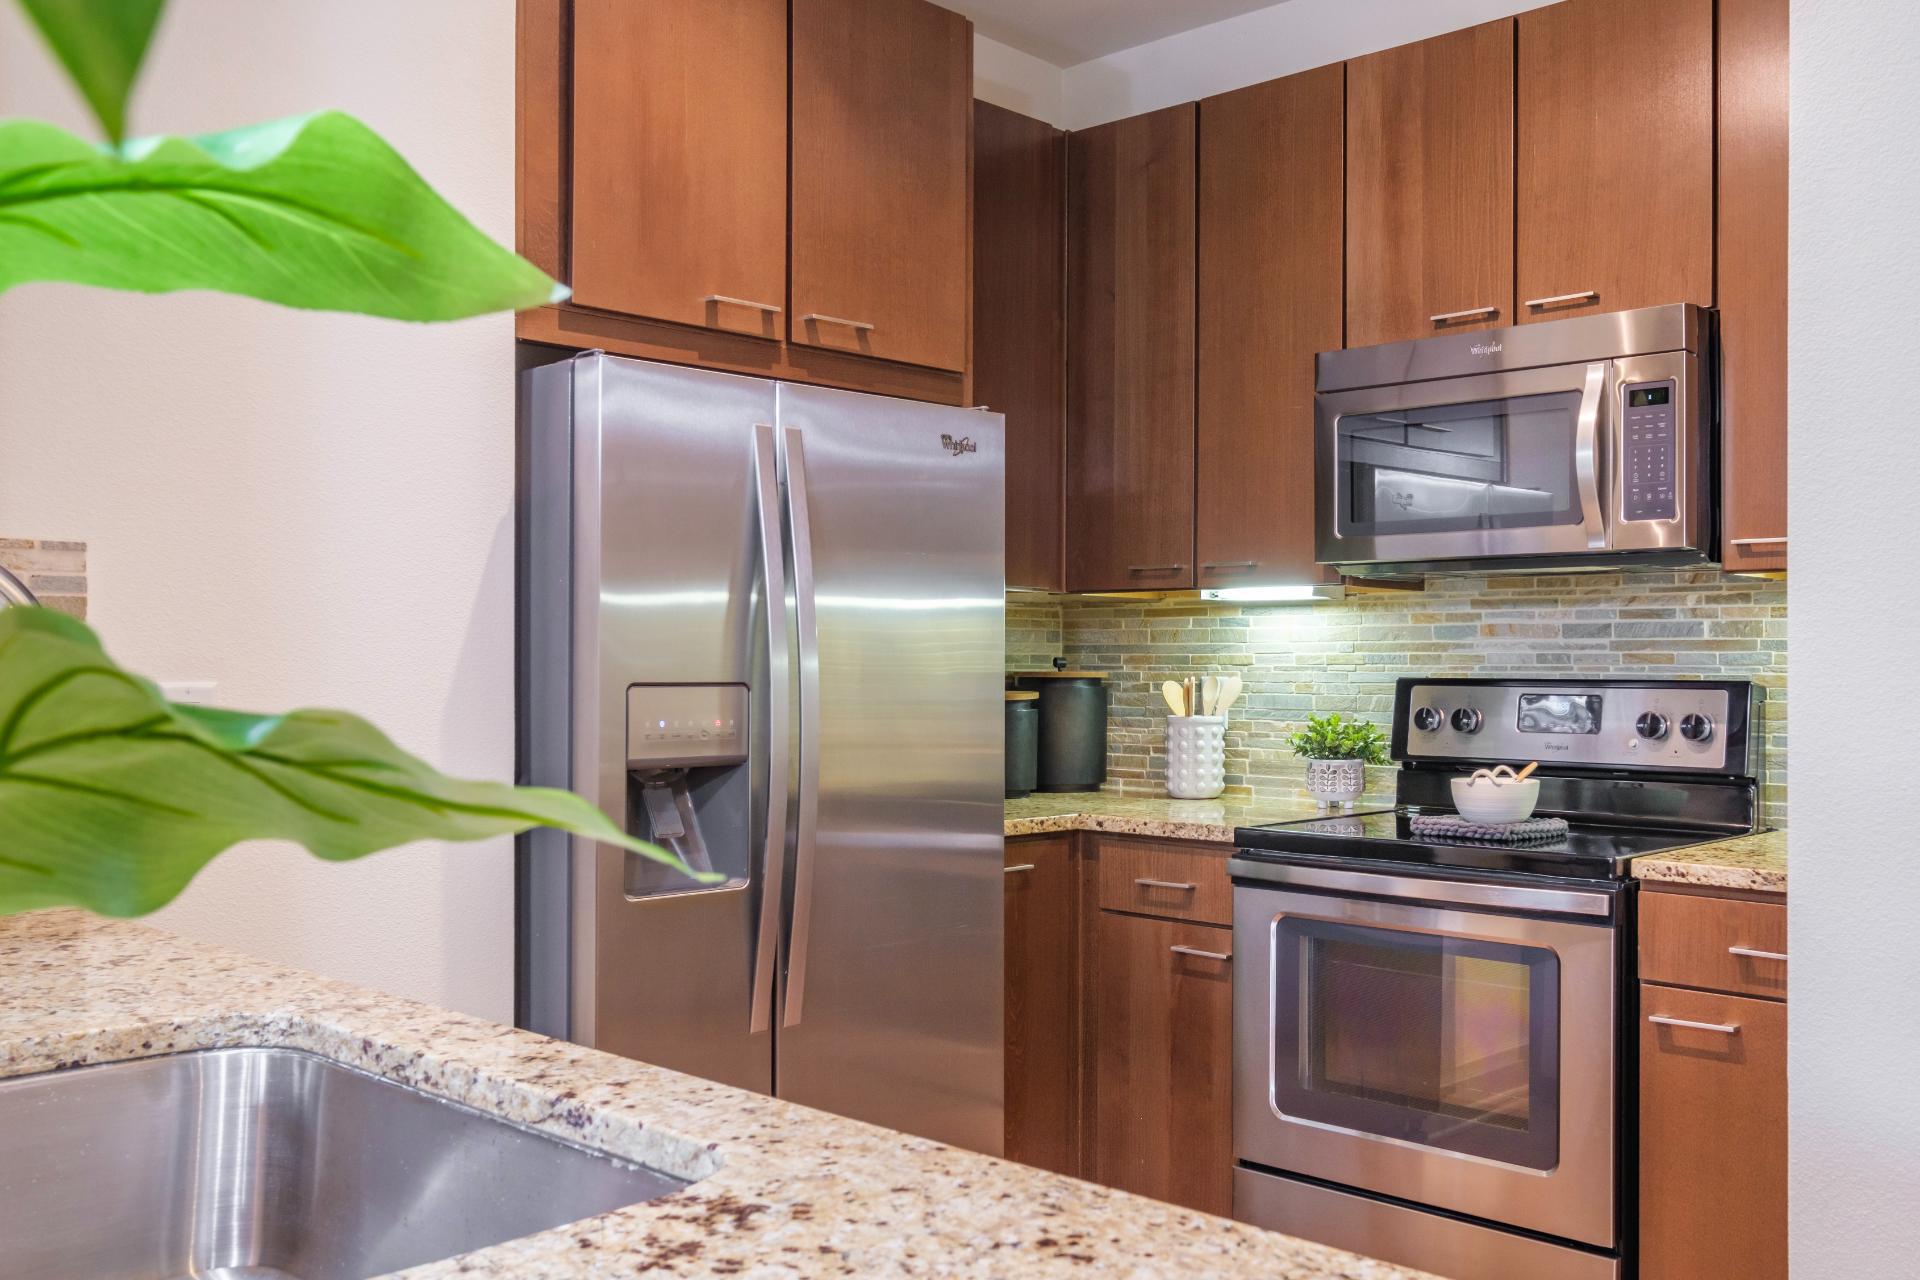 Kitchen With Stainless Steel Appliances Berkshire Medical District Apartments Dallas (469)772-5614